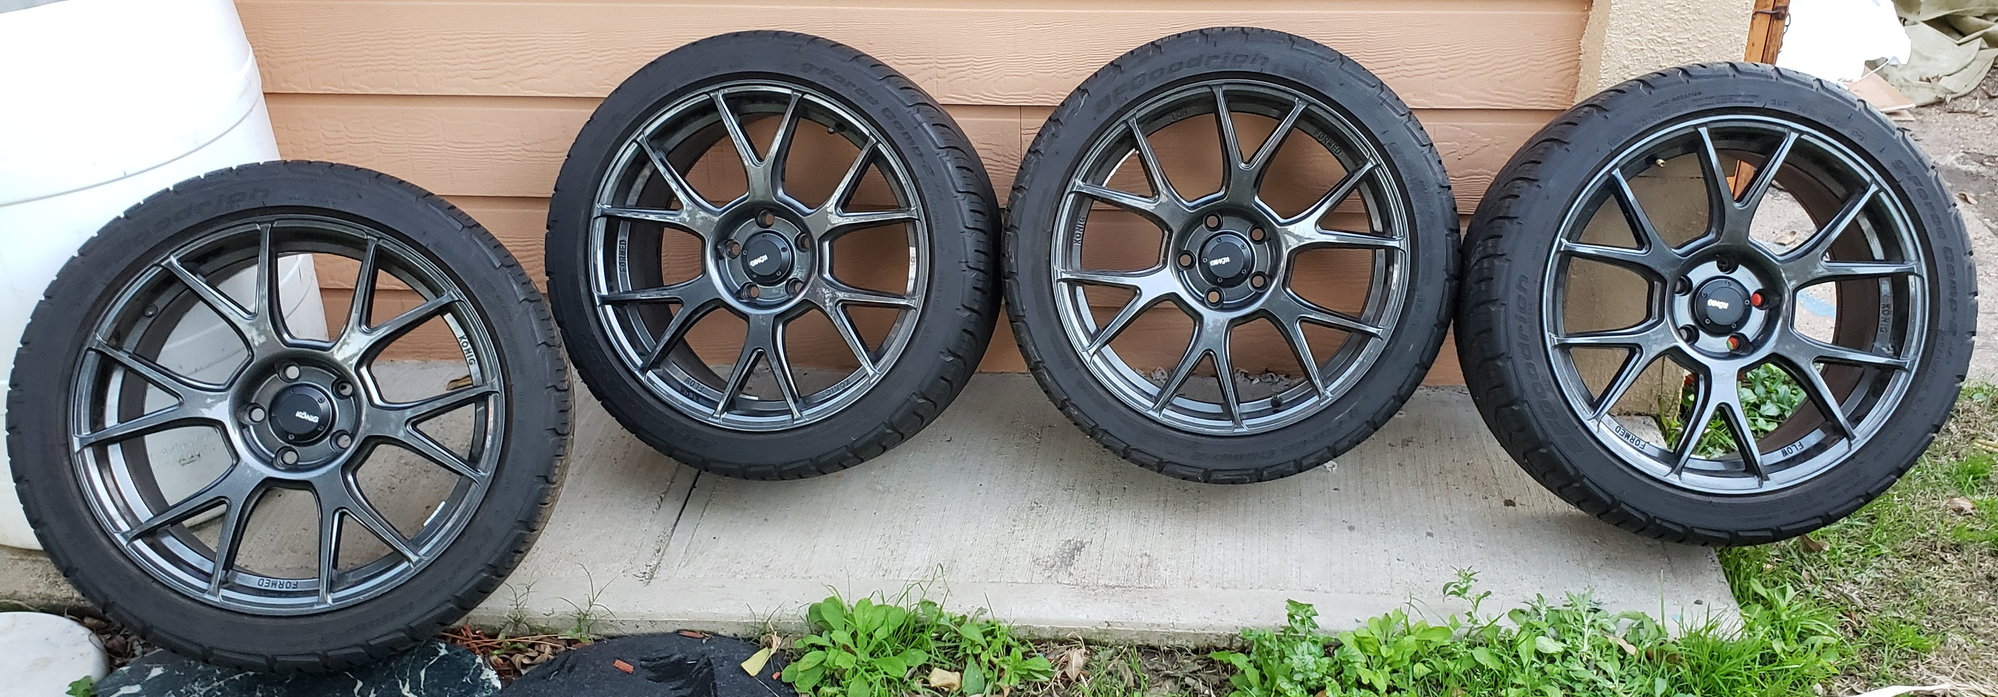 2008 Acura TL - Konig Ampliform Wheels and BFG G-Force Comp2 Tires - Wheels and Tires/Axles - $1,240 - Houston, TX 77584, United States